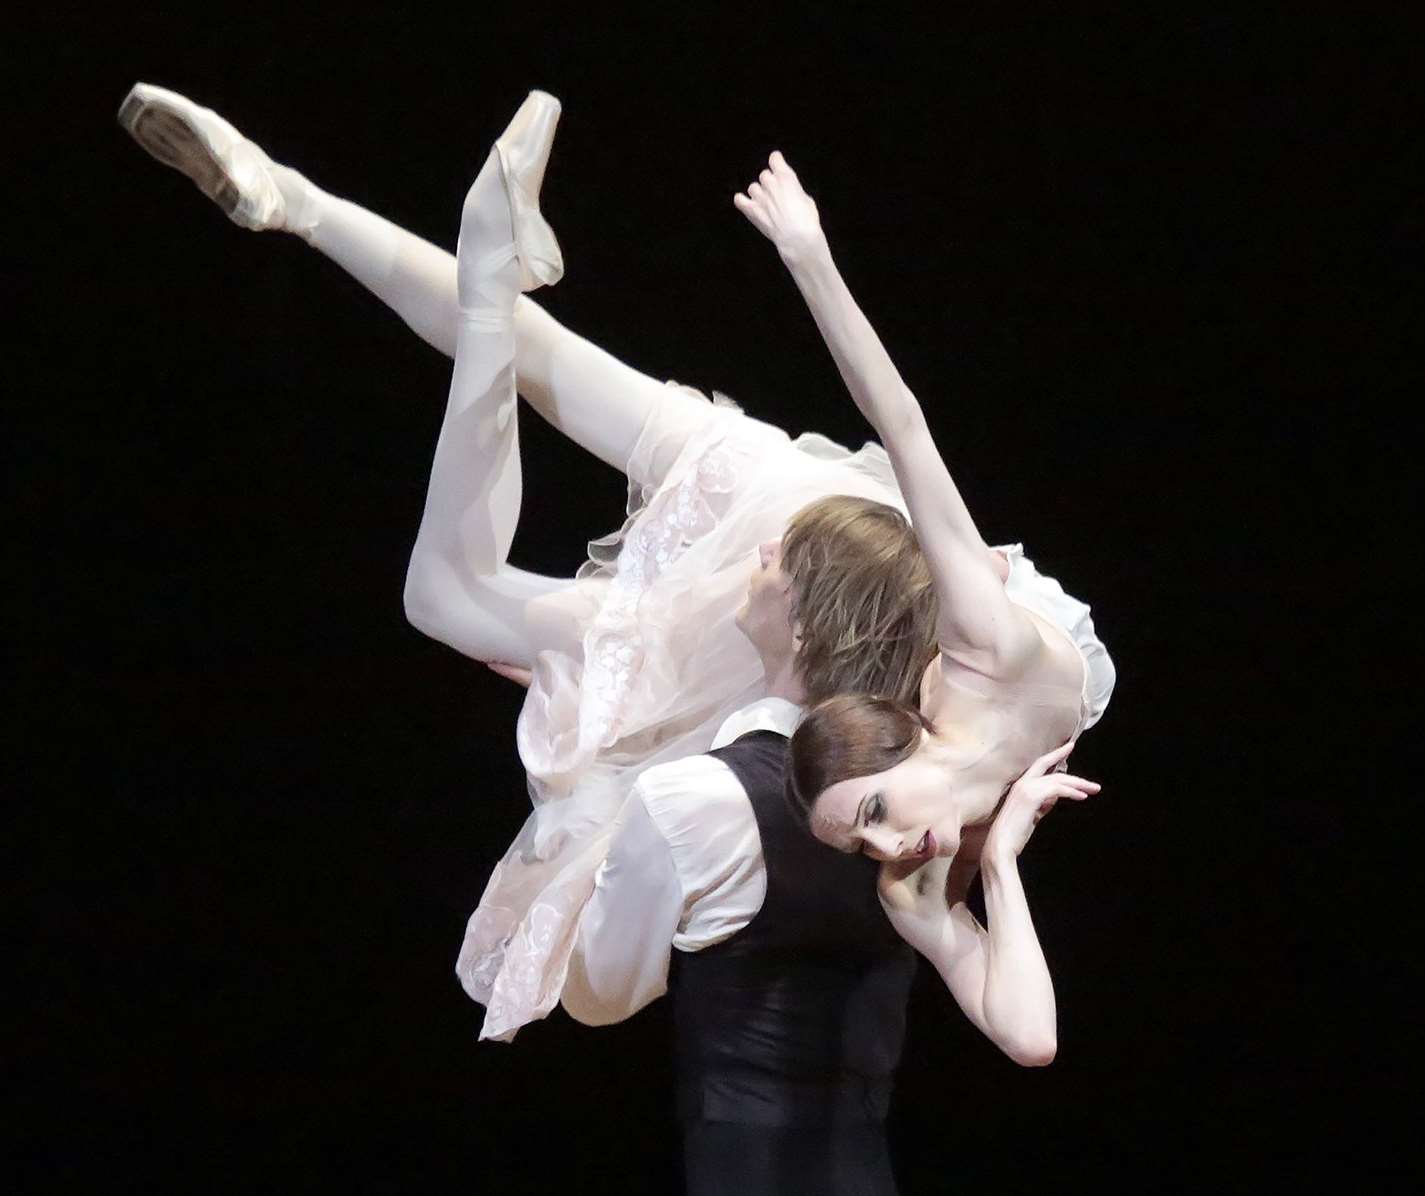 Kent cinemas screen Bolshoi Ballet live from Russia, performing The